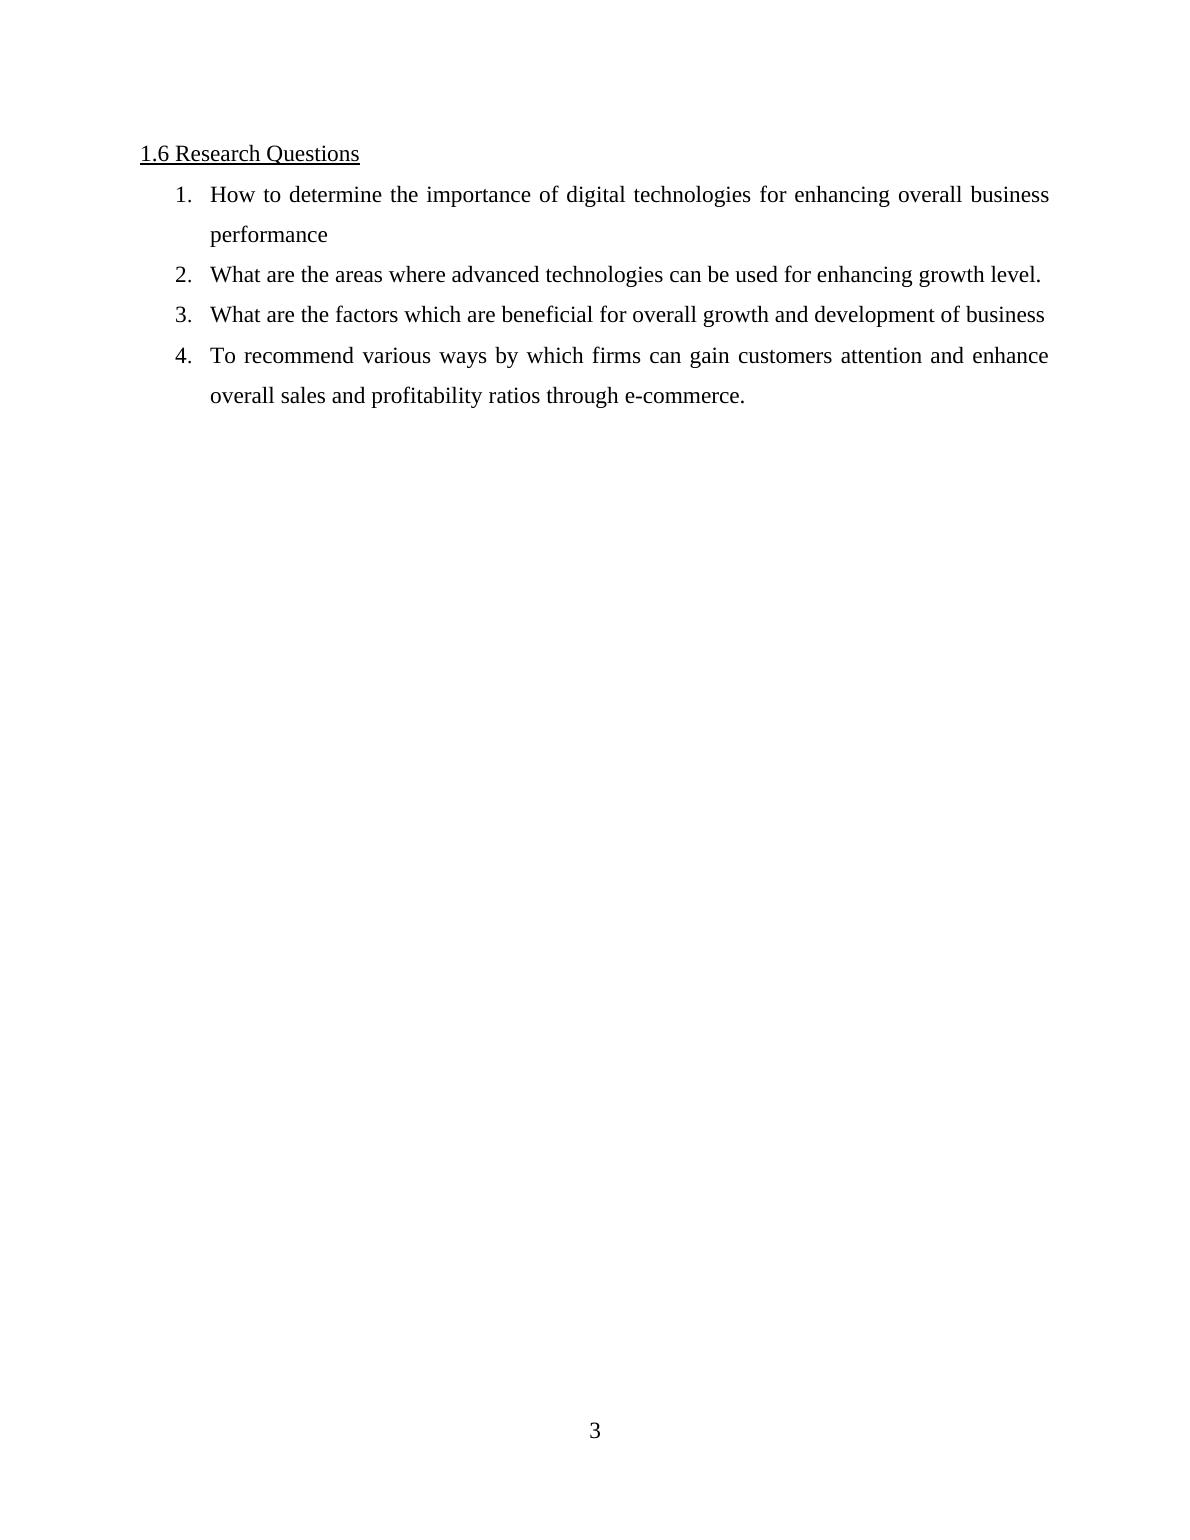 The Impact of Digital Technology on Business : Case Study_6